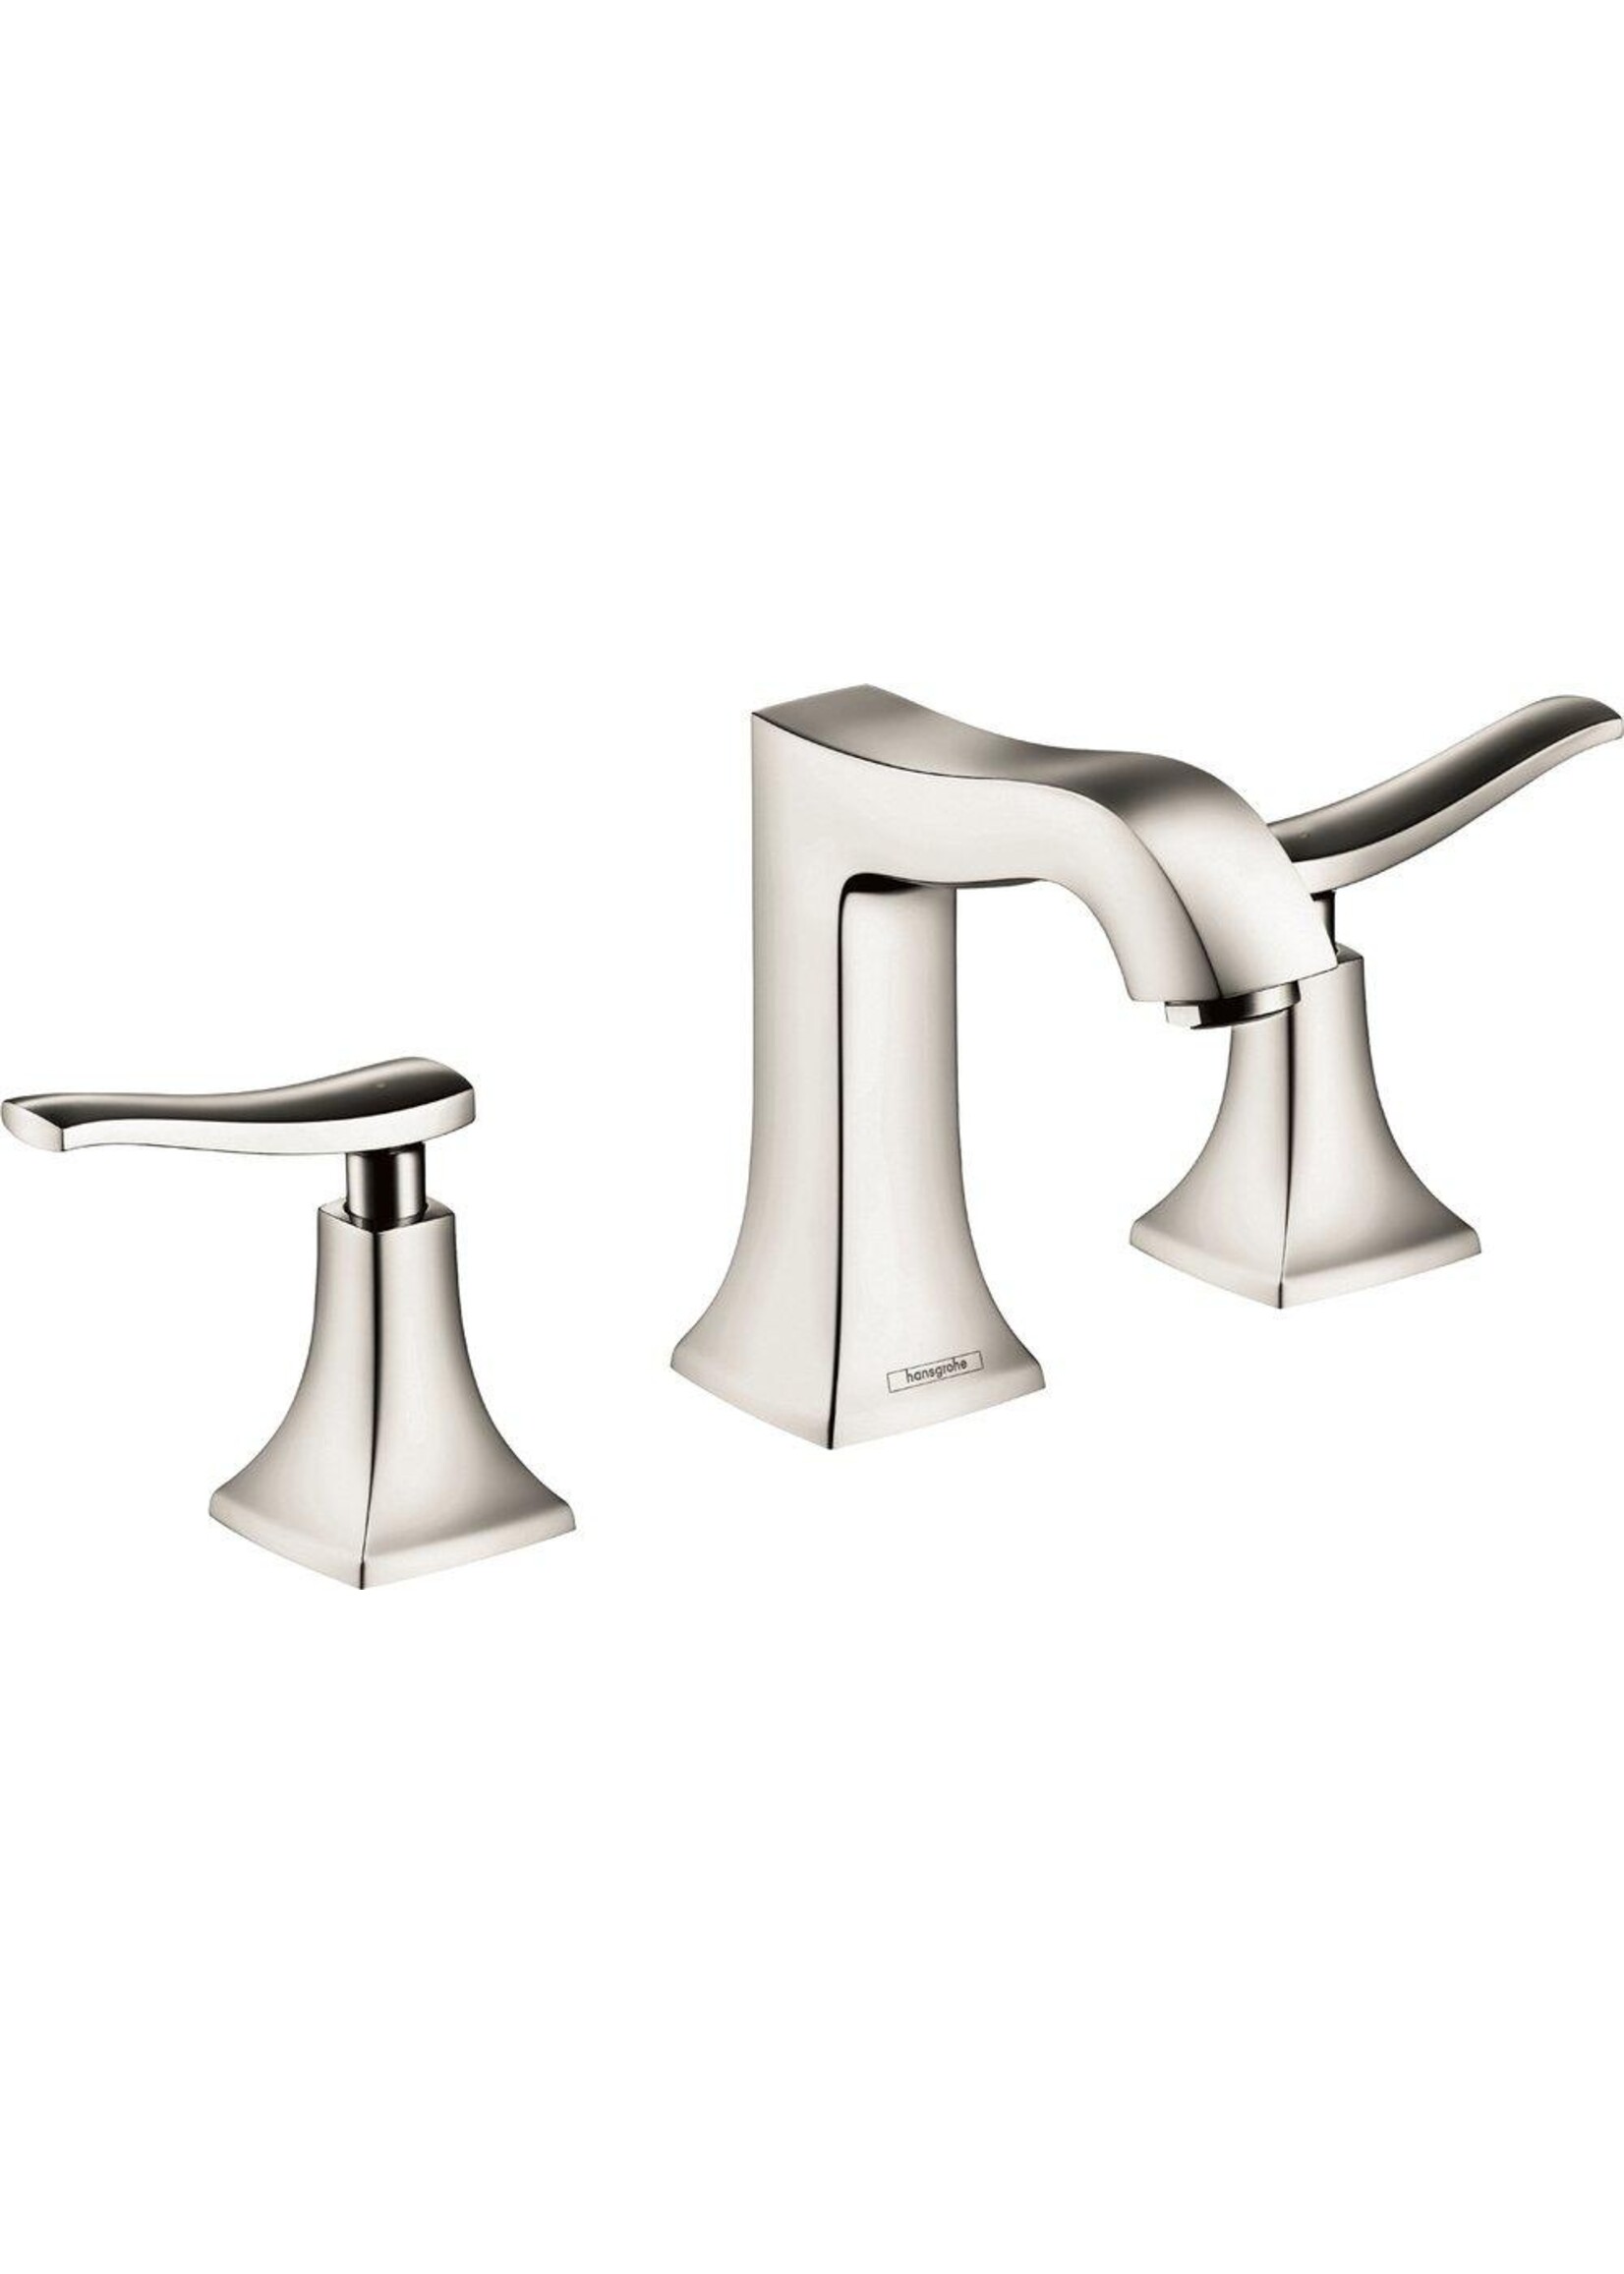 Hansgrohe Hansgrohe Metris C Widespread Faucet 100 with Pop-Up Drain, 1.2 GPM - Polished Nickel